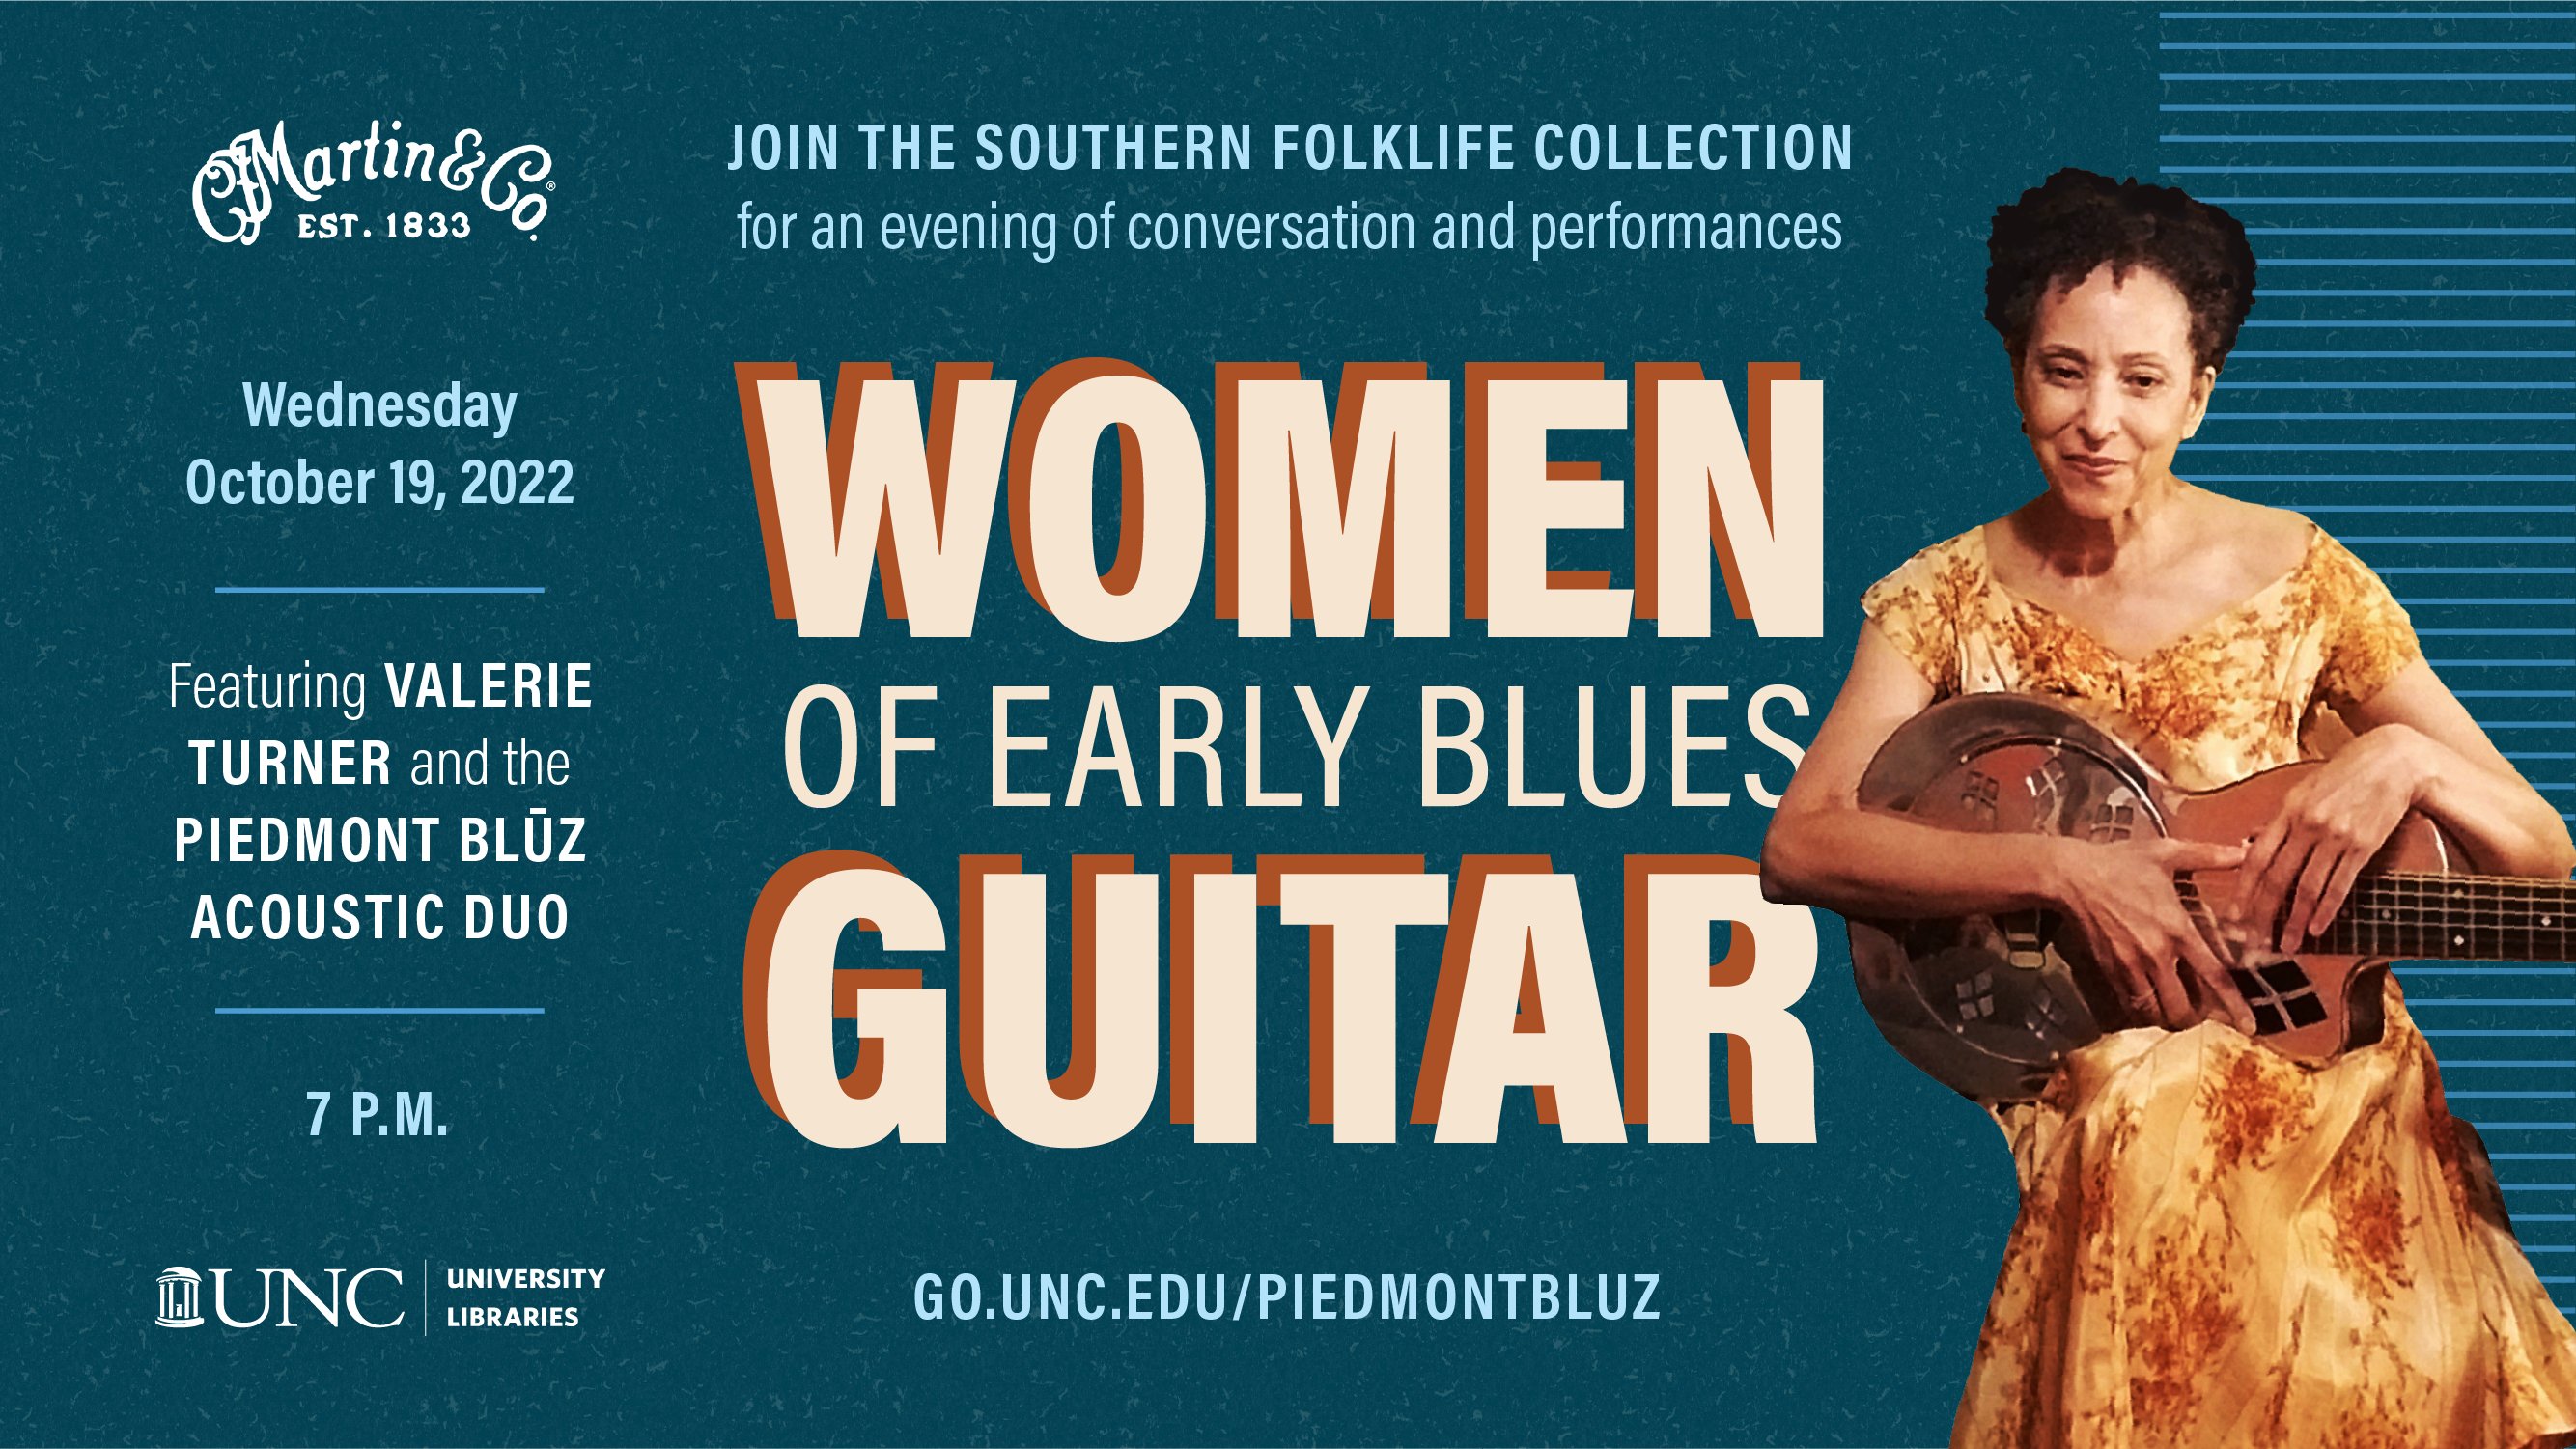 Join the southern folklife collection for an evening of conversations and performances on Wednesday, October 19 2022. Featuring Valerie Turner and the Piedmont Bluz acoustic duo, 7 p.m. 